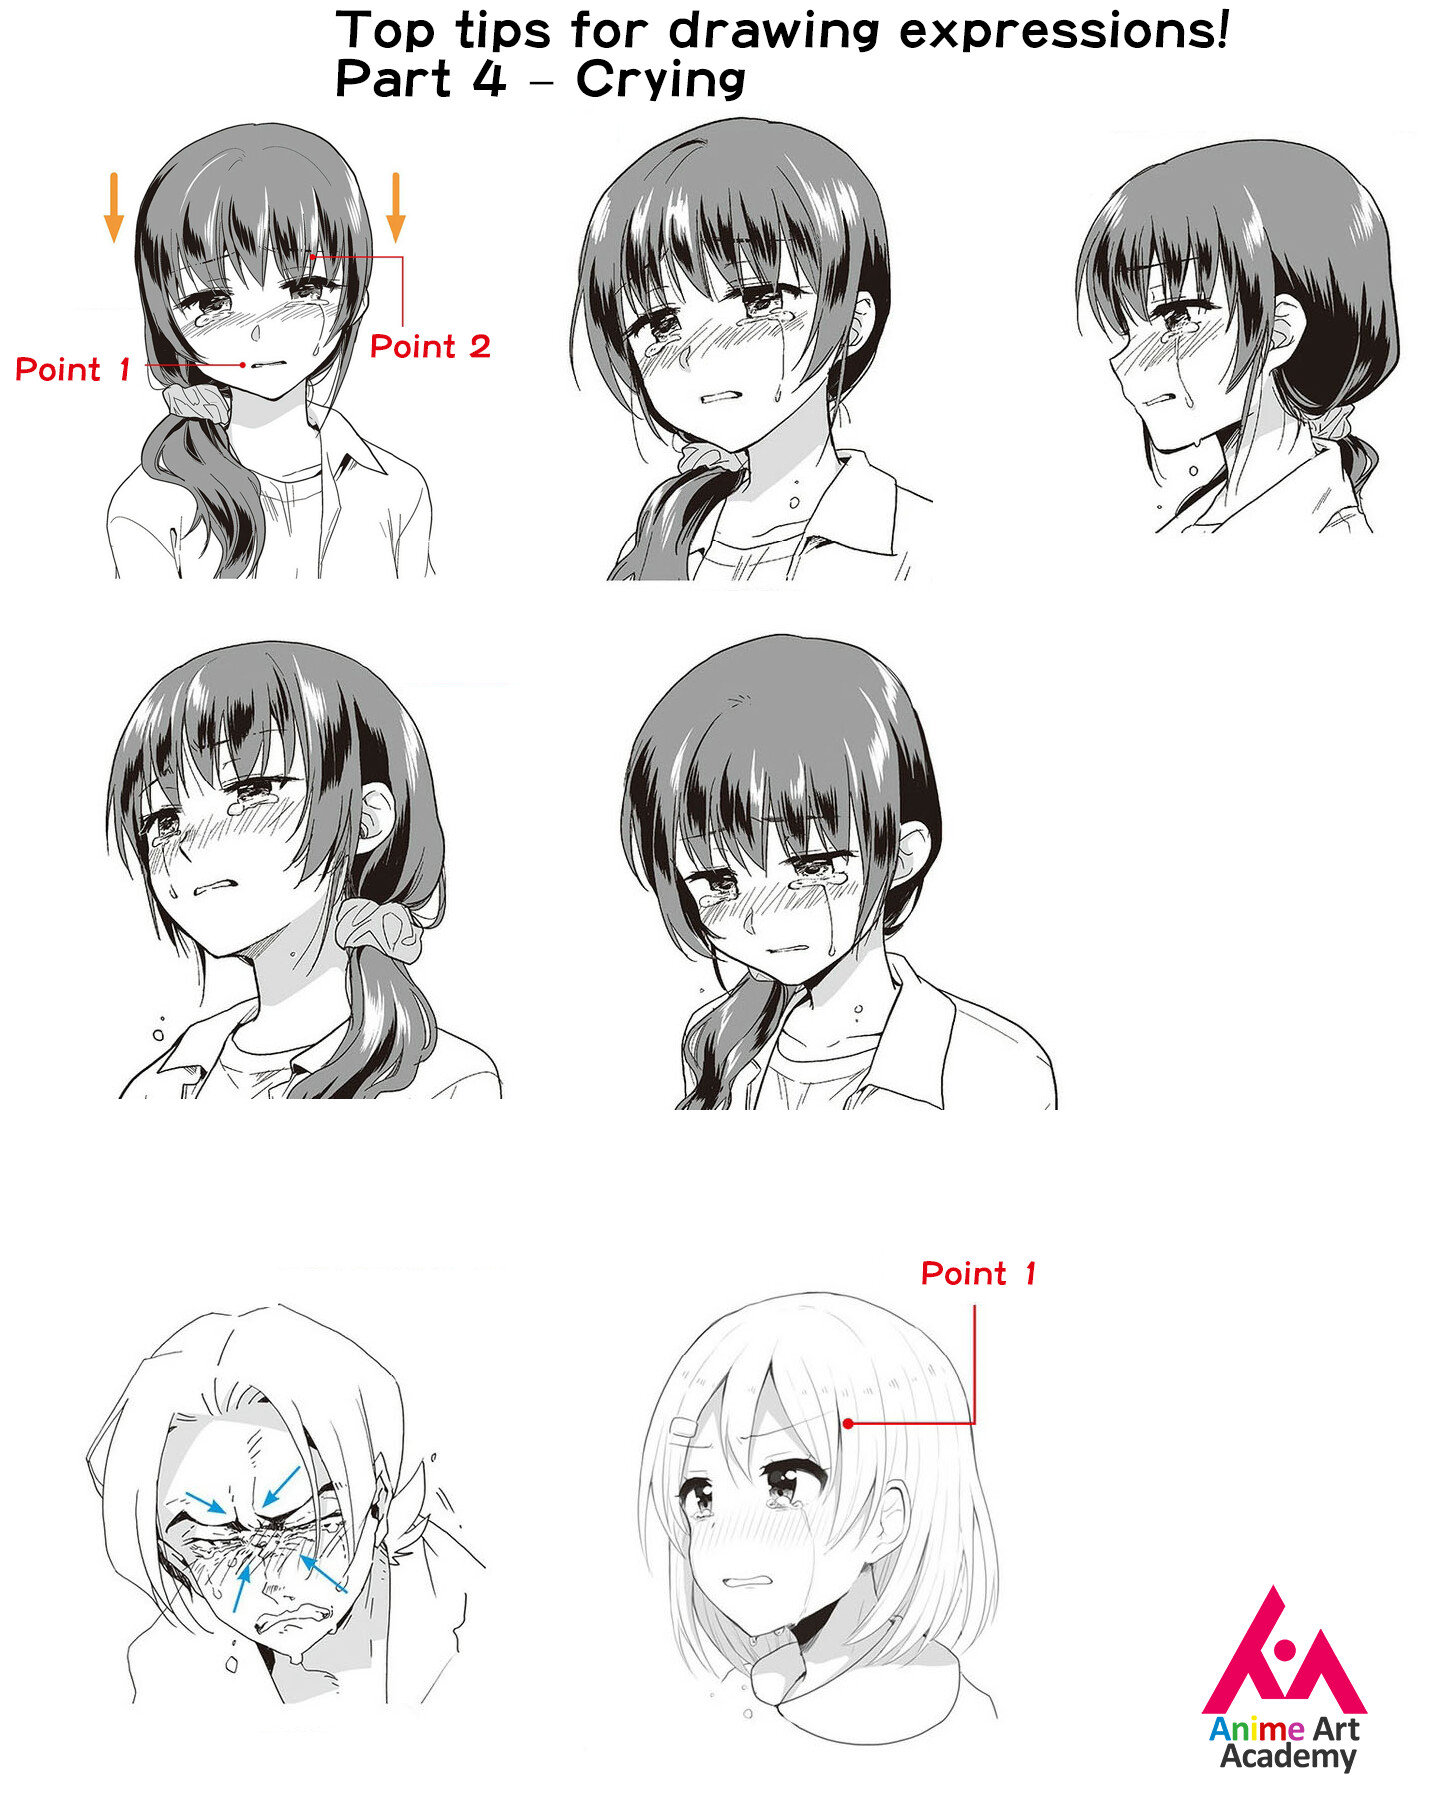 ArtStation - Top tips for drawing expressions! Part 4 – Crying